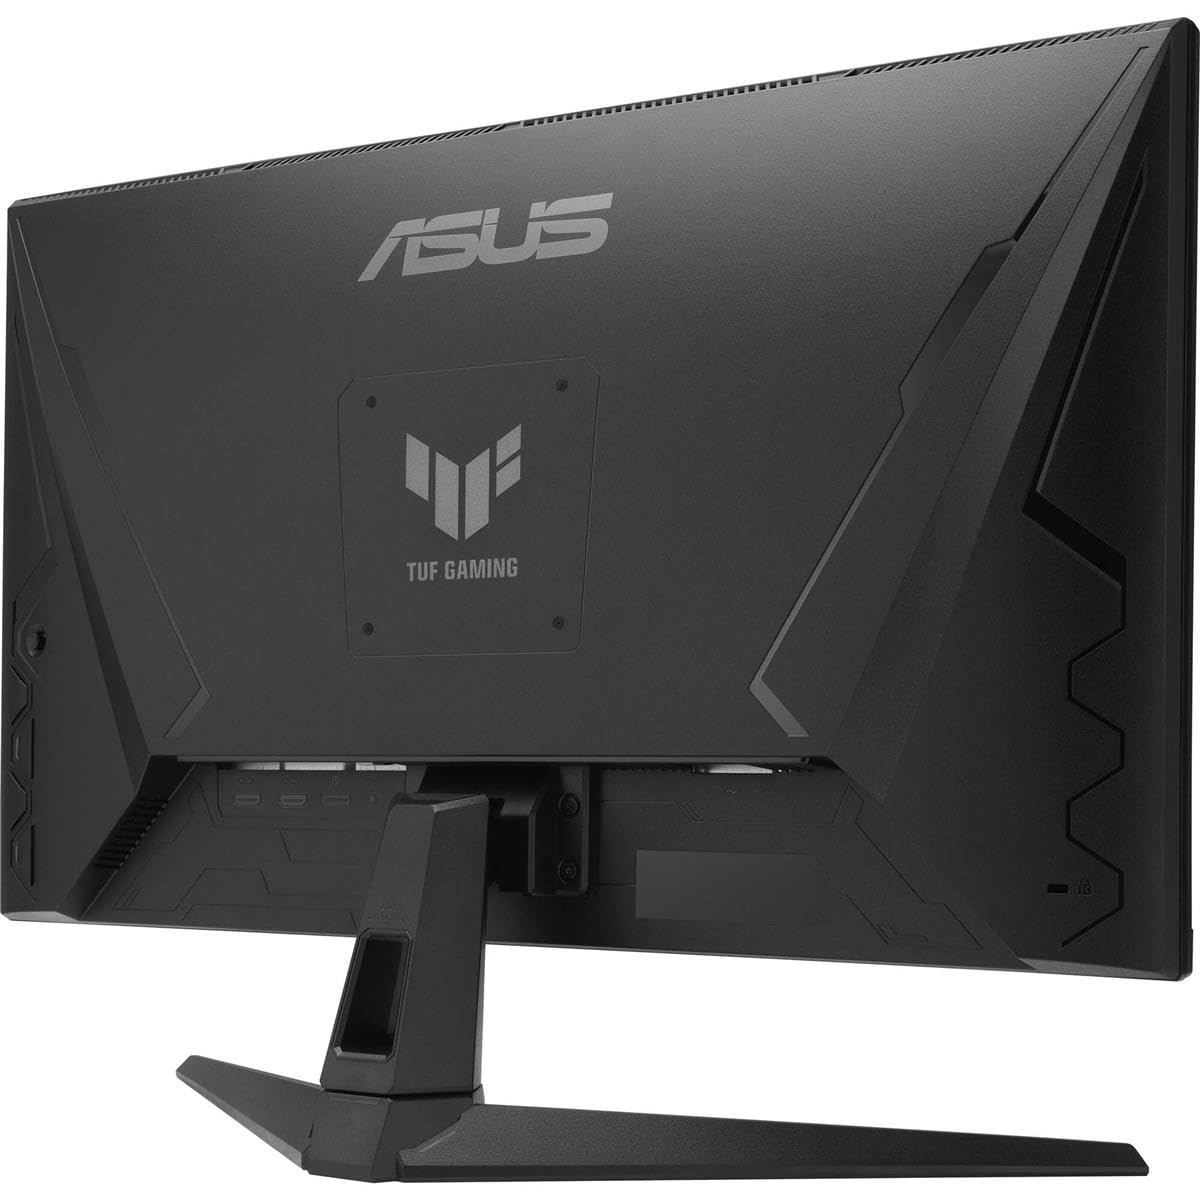 ASUS TUF Gaming 27” 1440P Gaming Monitor (VG27AQM1A) - QHD (2560 x 1440), 260Hz, 1ms, Fast IPS, Extreme Low Motion Blur Sync, Freesync Premium, G-SYNC Compatible, DisplayHDR400, 3 Year Warranty